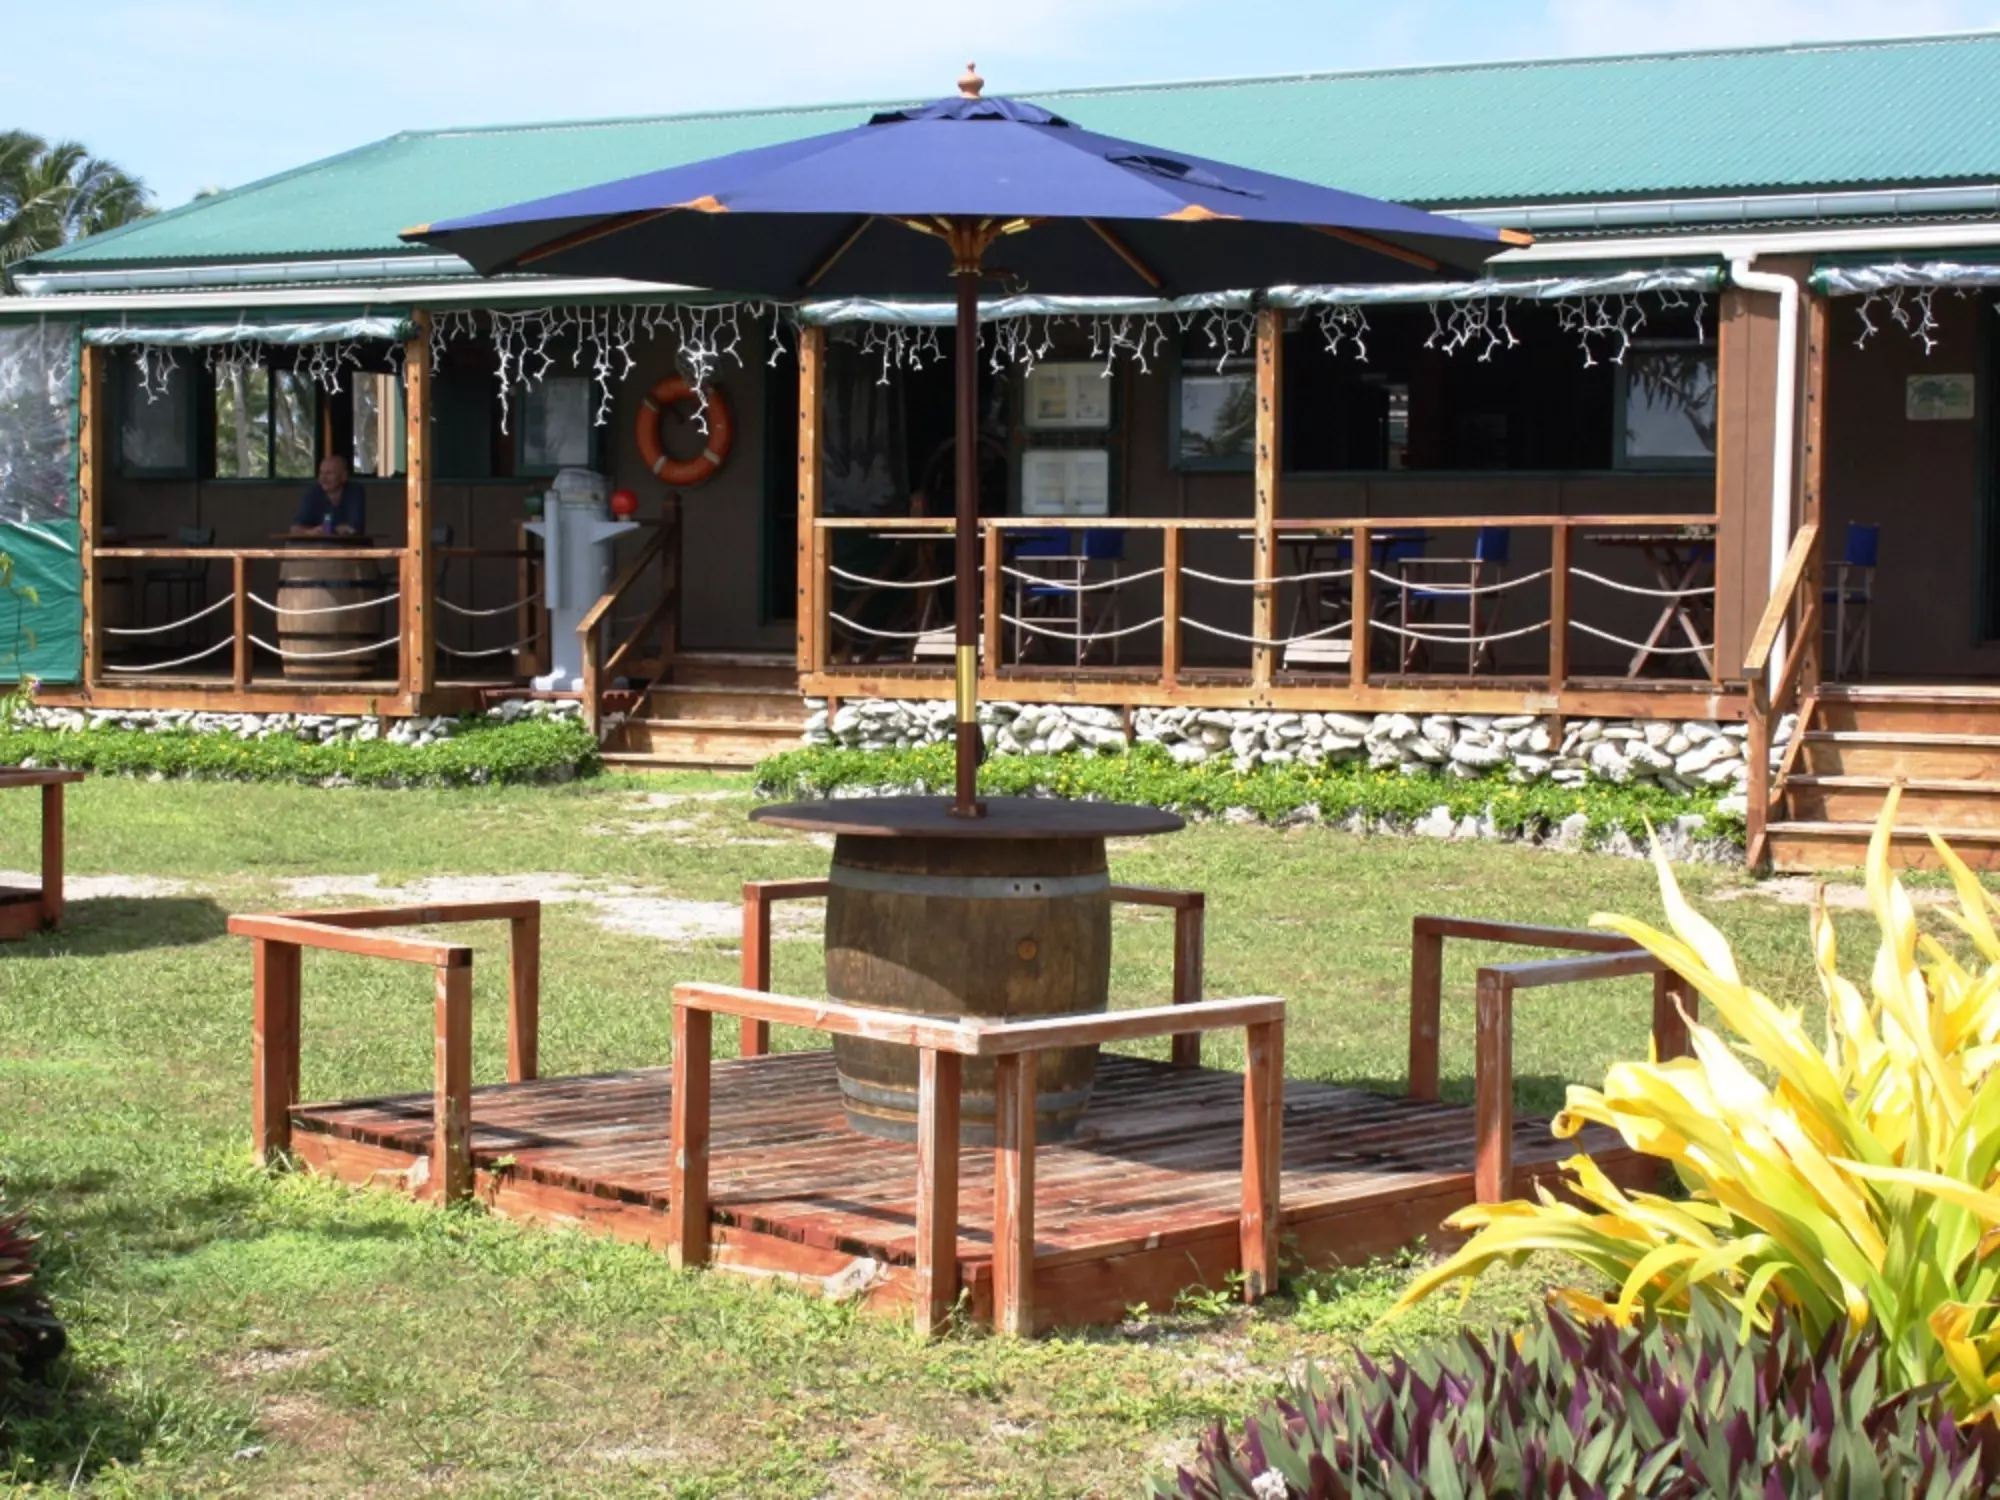 The Boat Shed Bar & Grill in Aitutaki